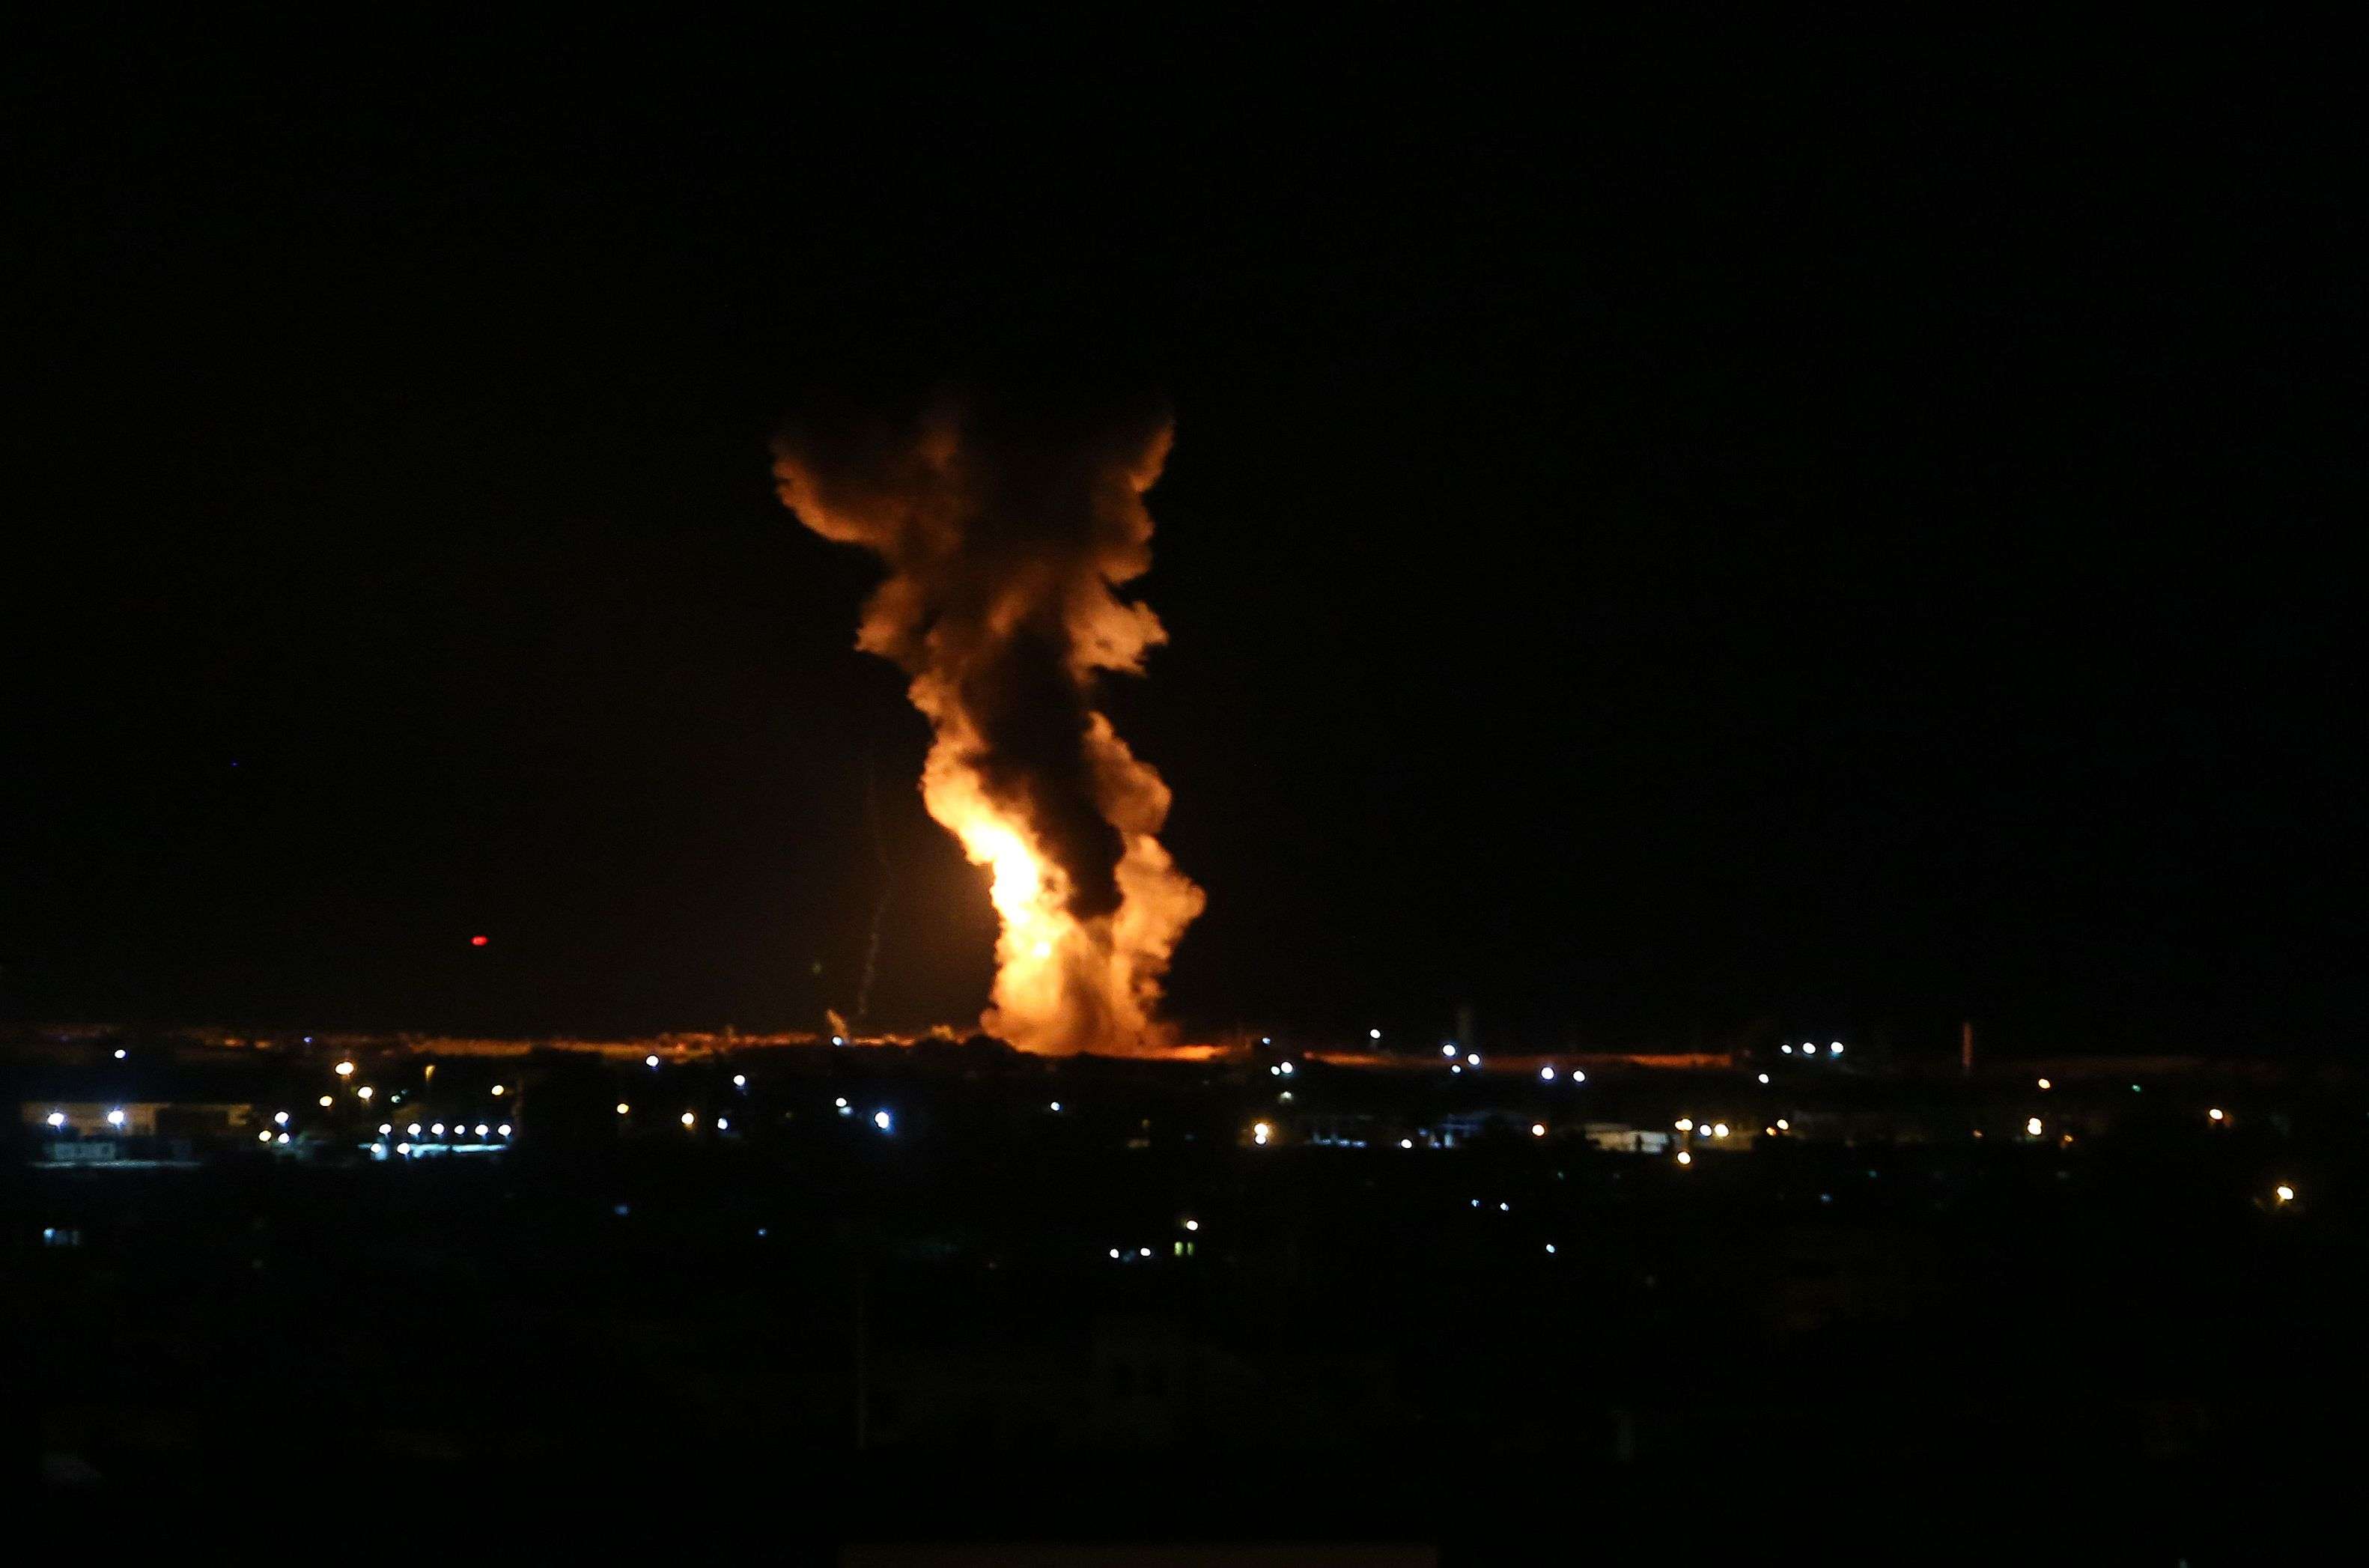 Israel and Hamas have fought three wars since 2008 and the tit-for-tat fire has raised fear of another conflict.